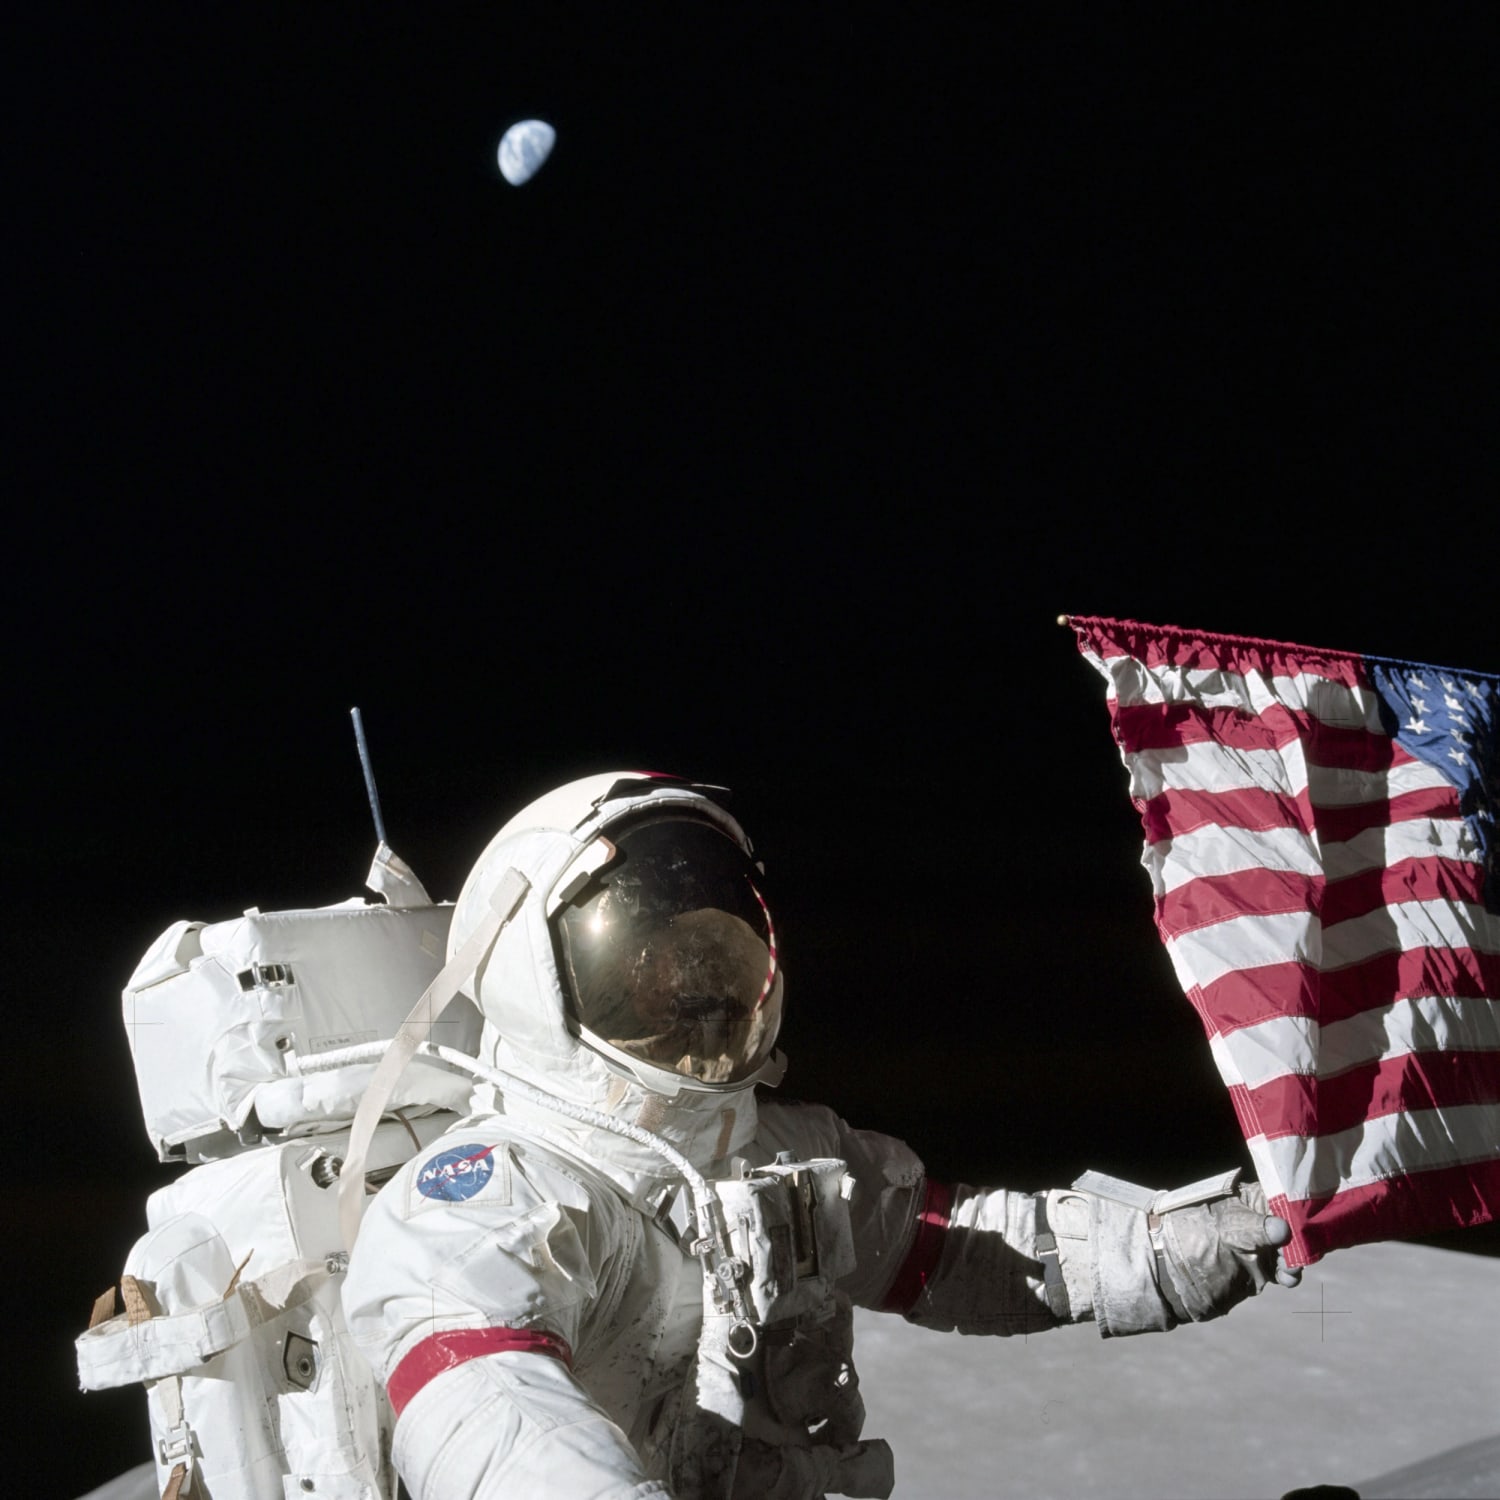 An american astronaut walked on the moon